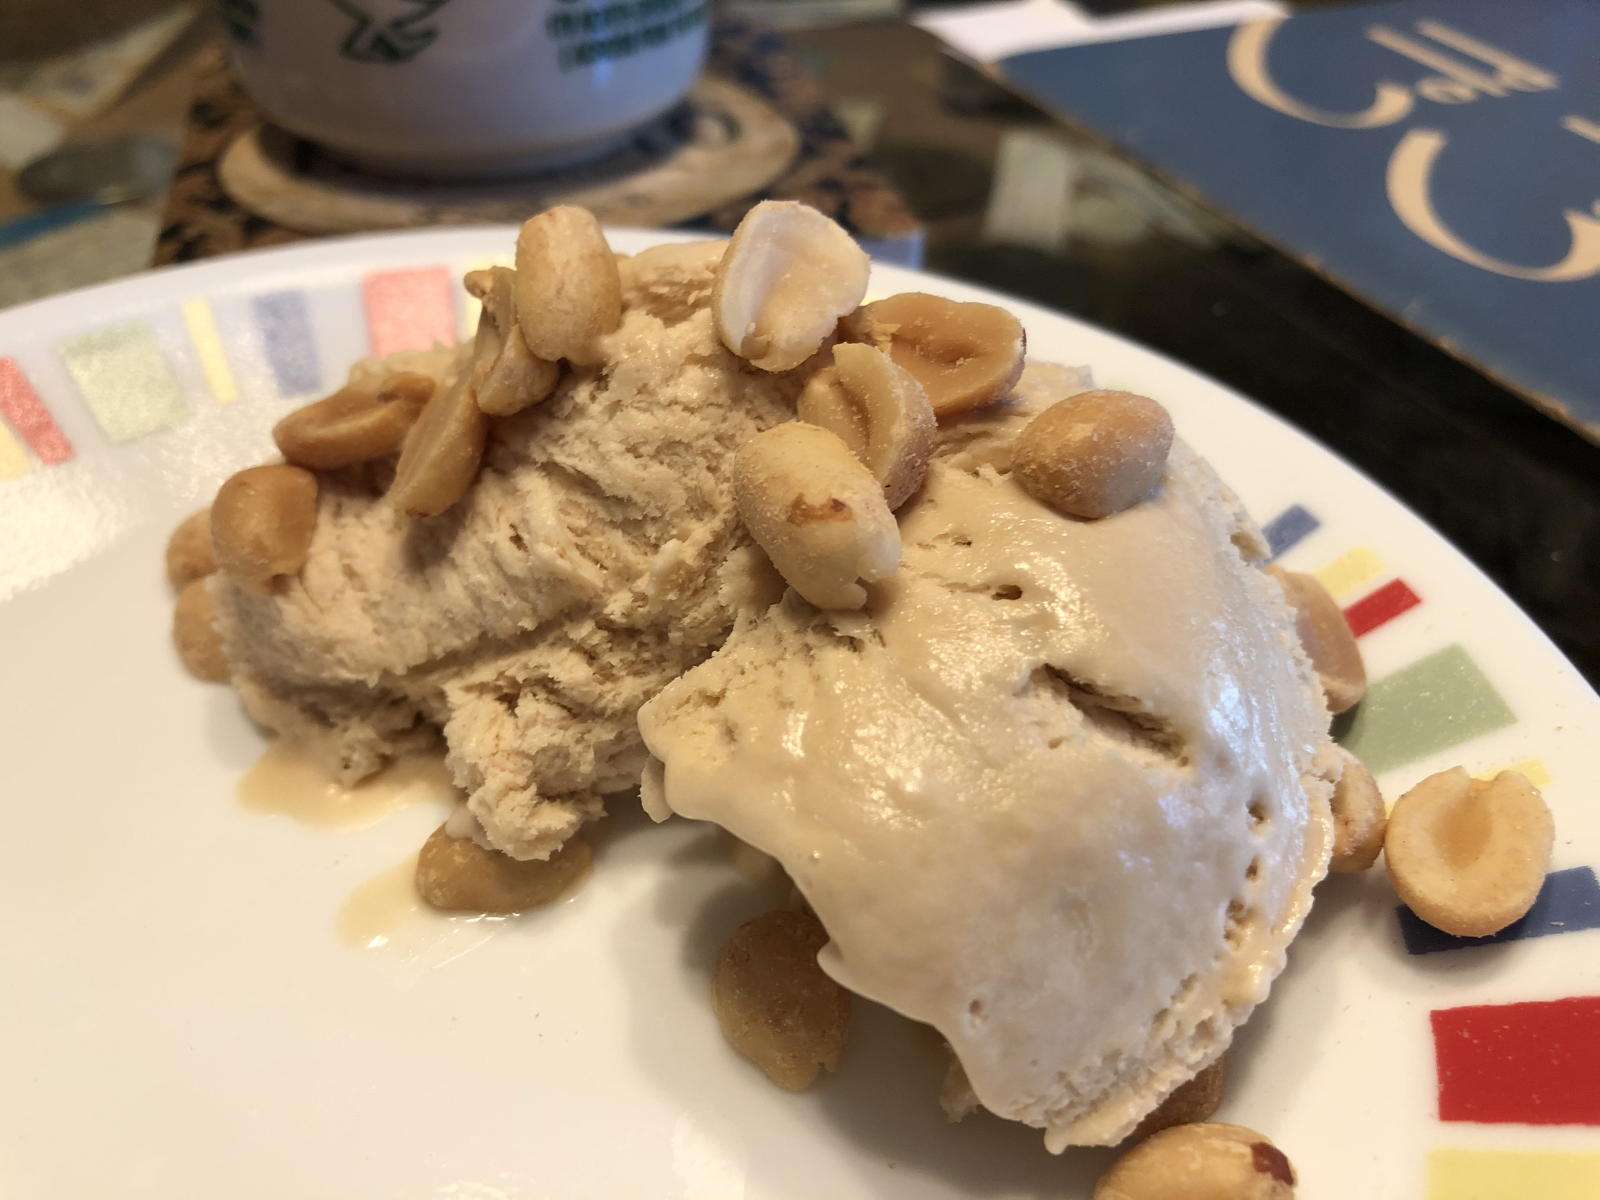 Cold Cooking maple ice cream: Maple ice cream from the 1942 Montgomery Ward Cold Cooking refrigerator cookbook.; cookbooks; maple; ice cream